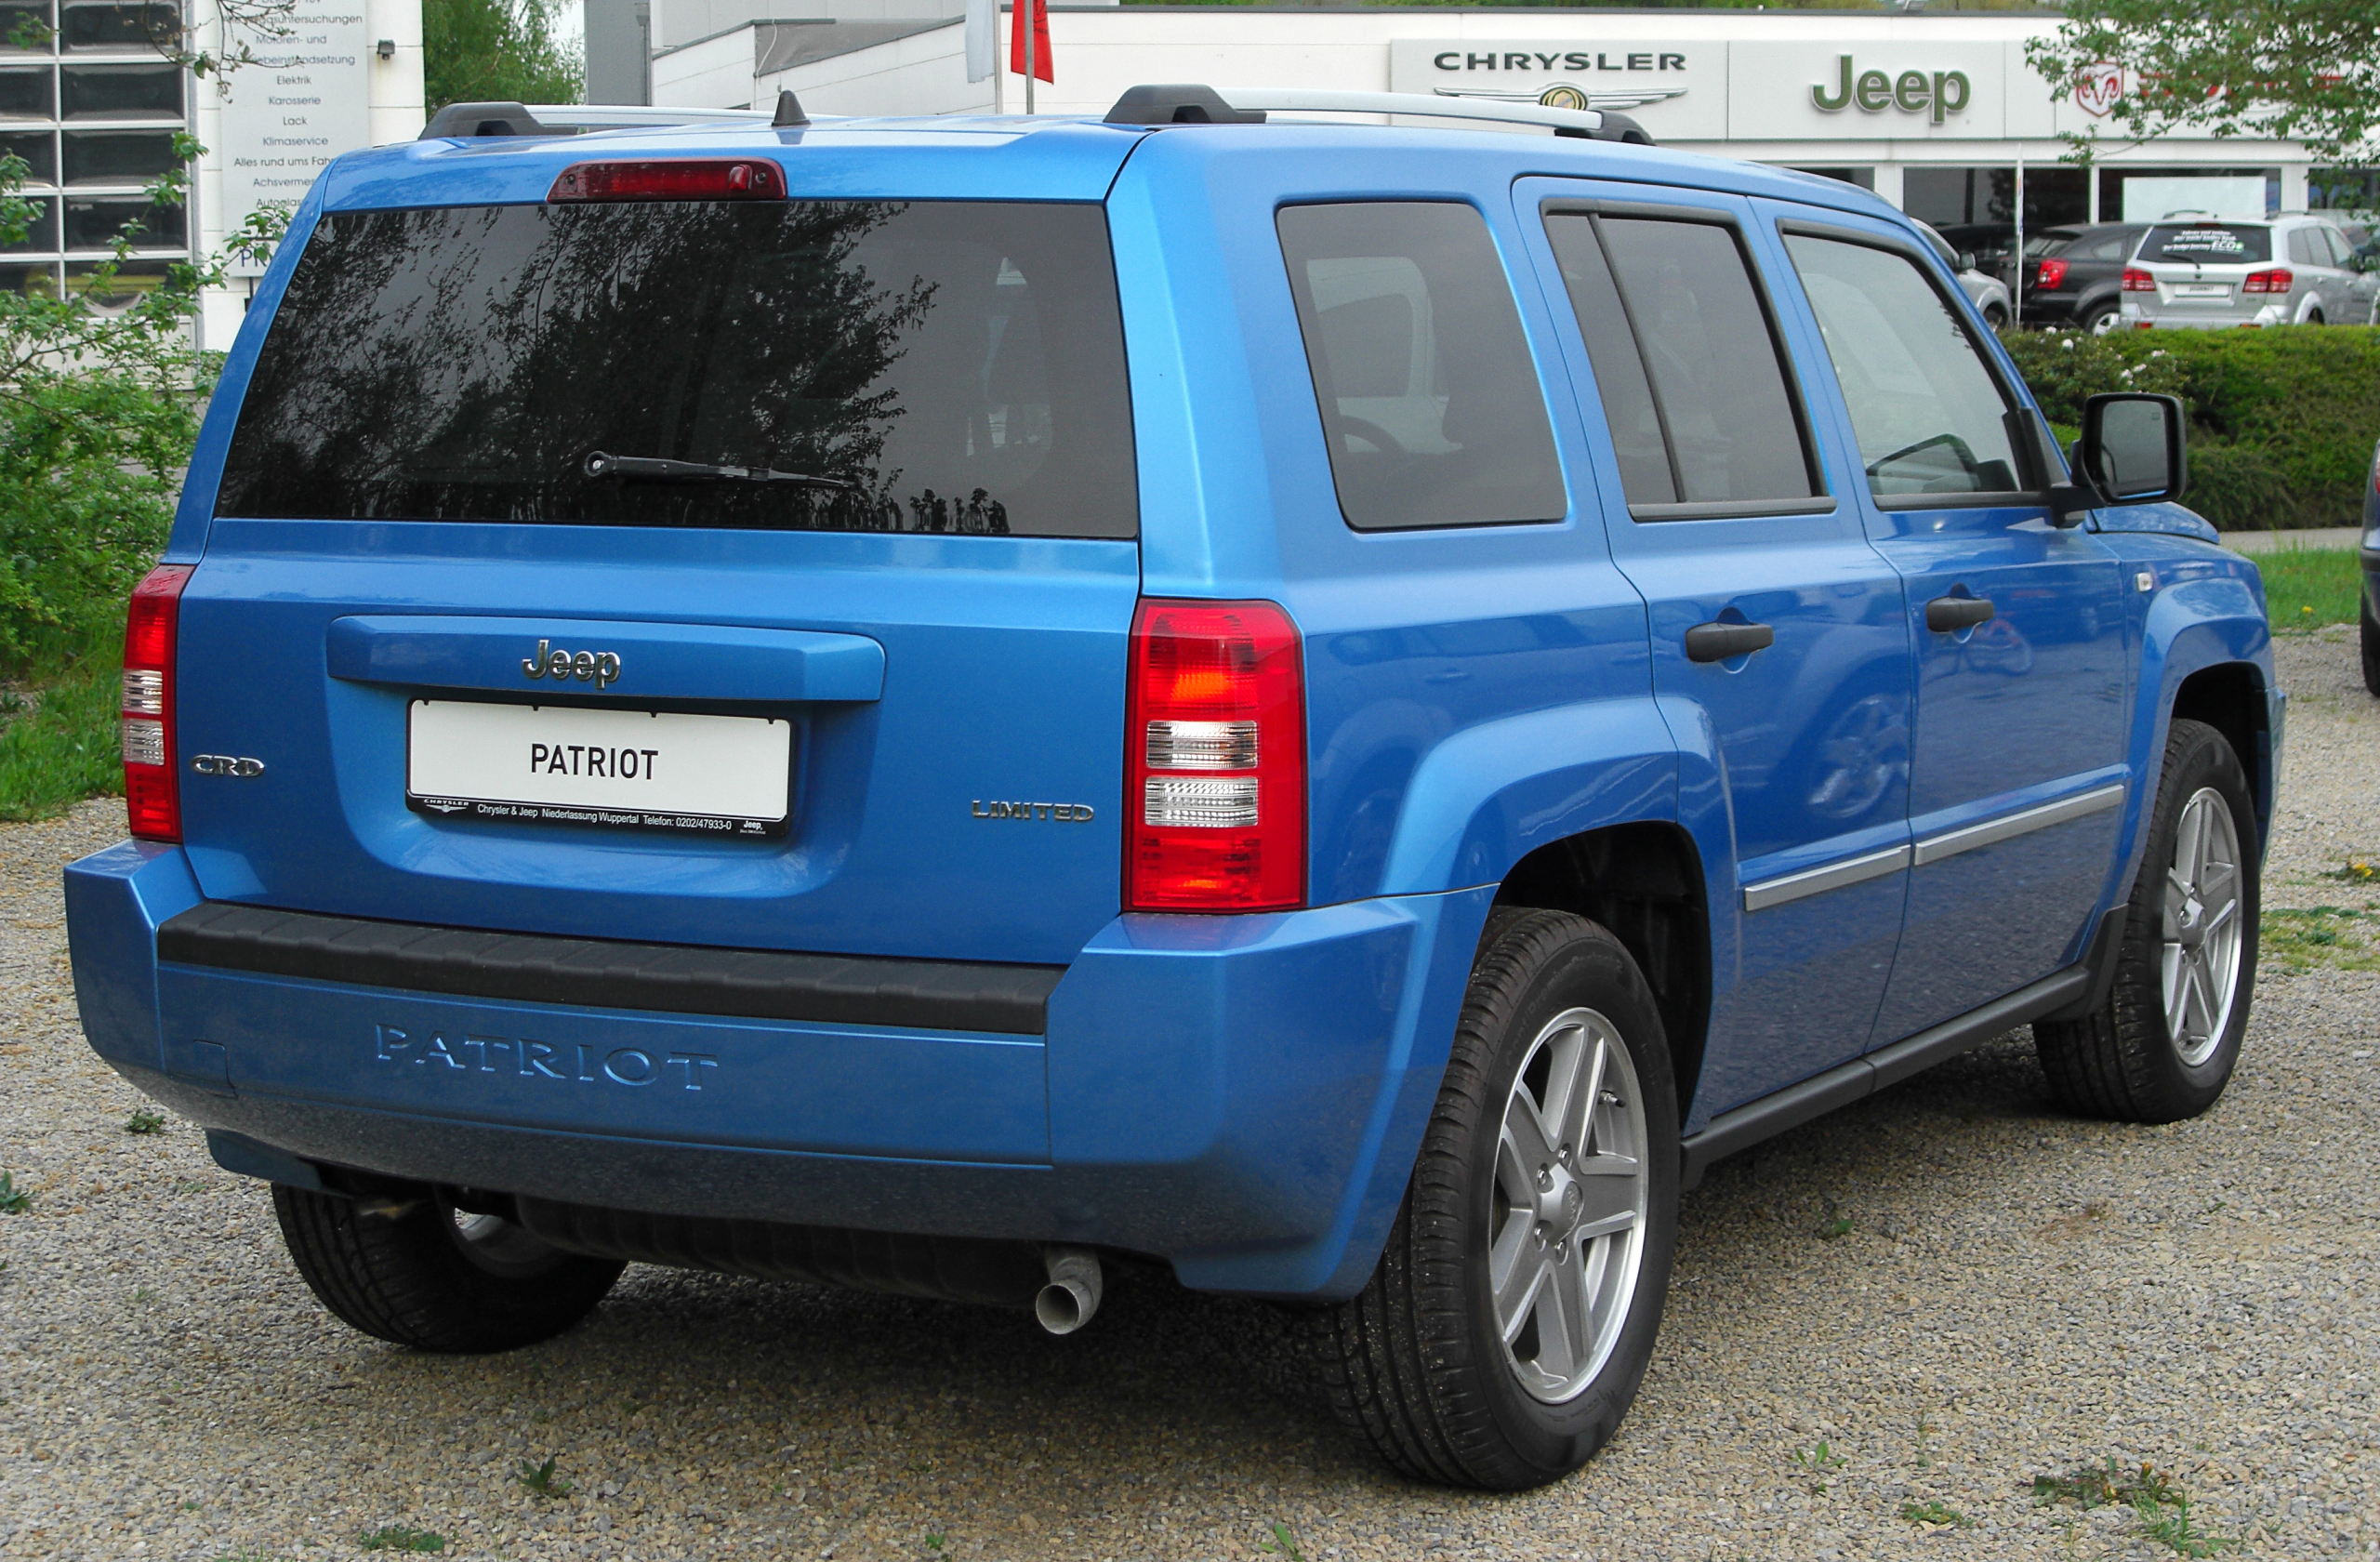 File:Jeep Patriot Limited 2.0 CRD rear 20100429.jpg - Wikimedia Commons